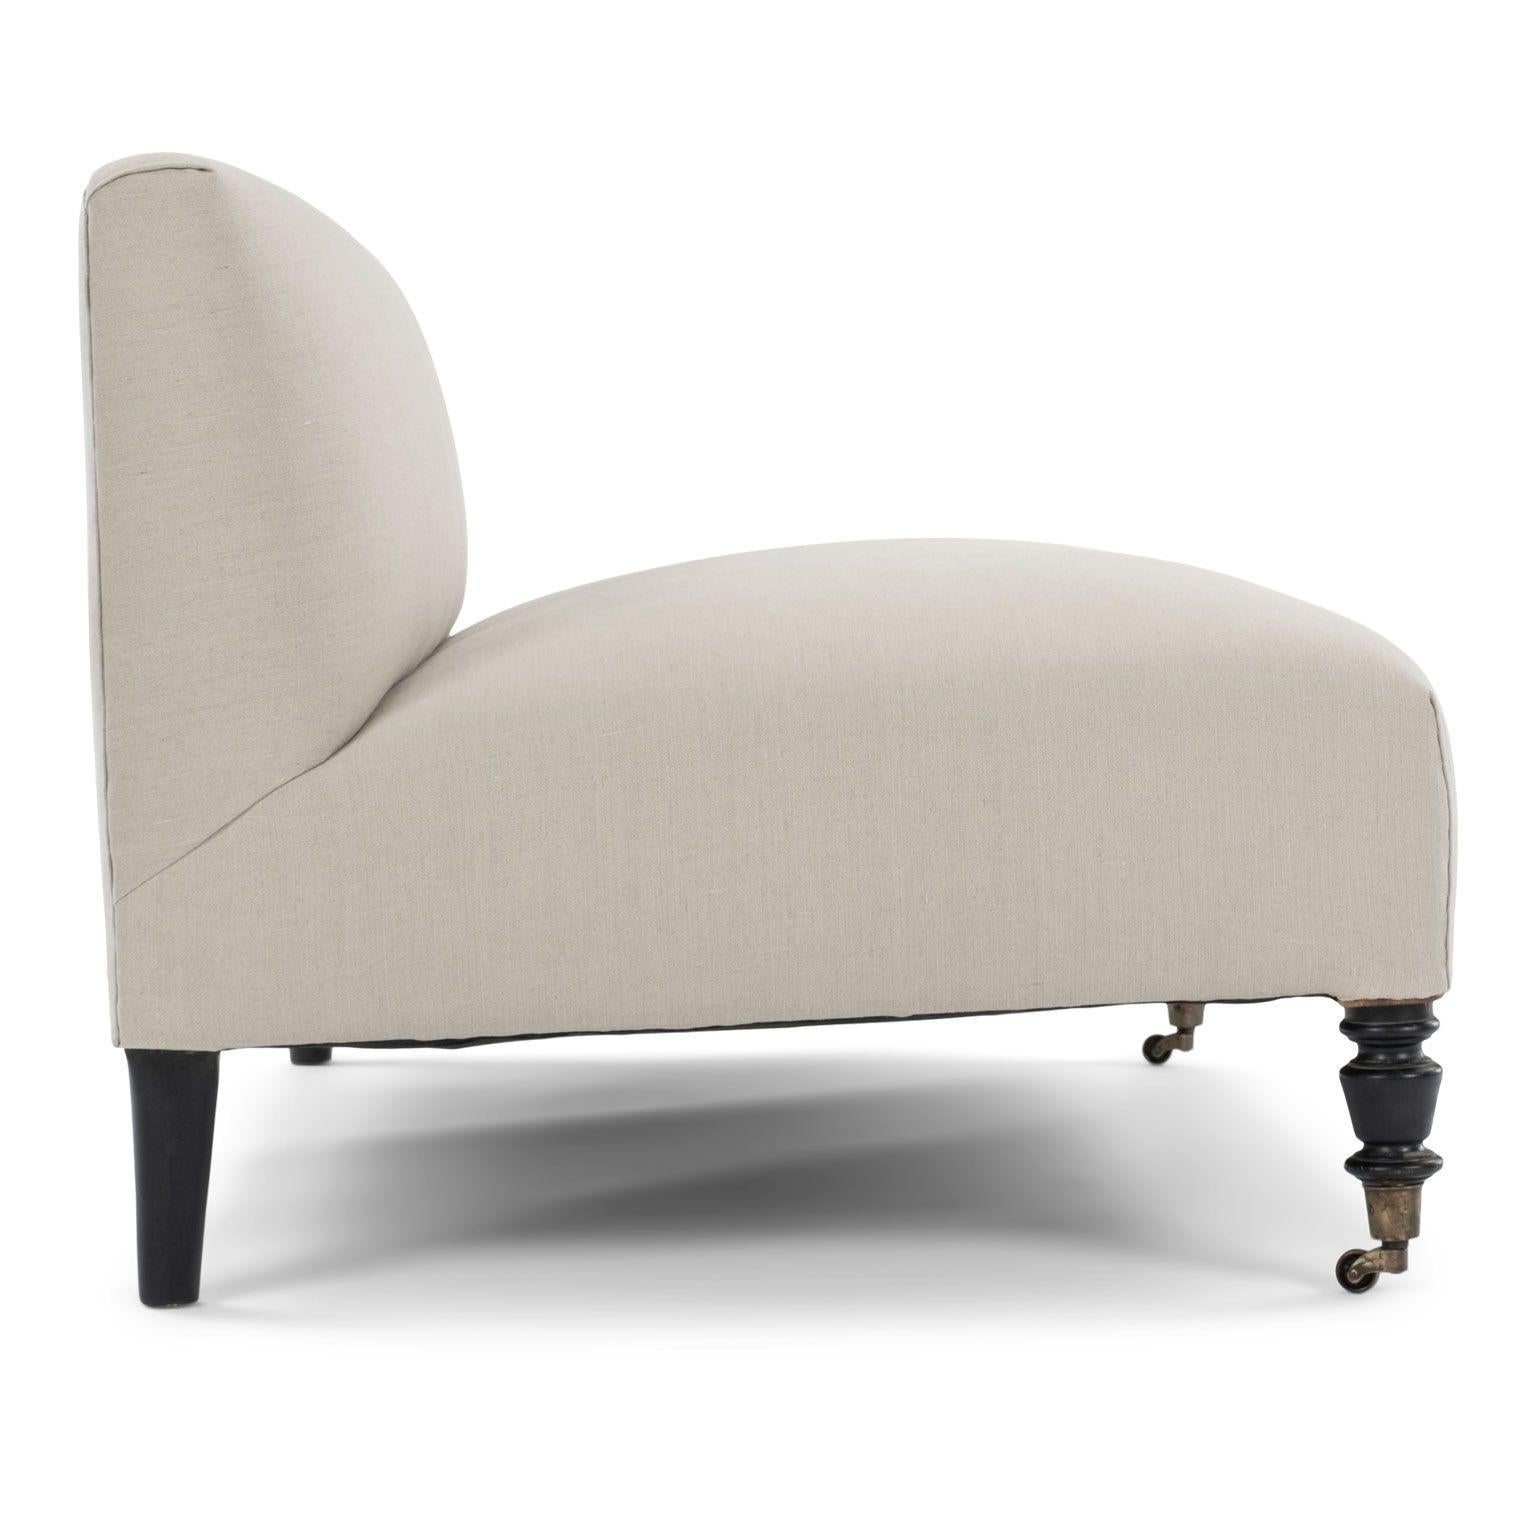 Low-Profile Napoleon III French Banquette 1